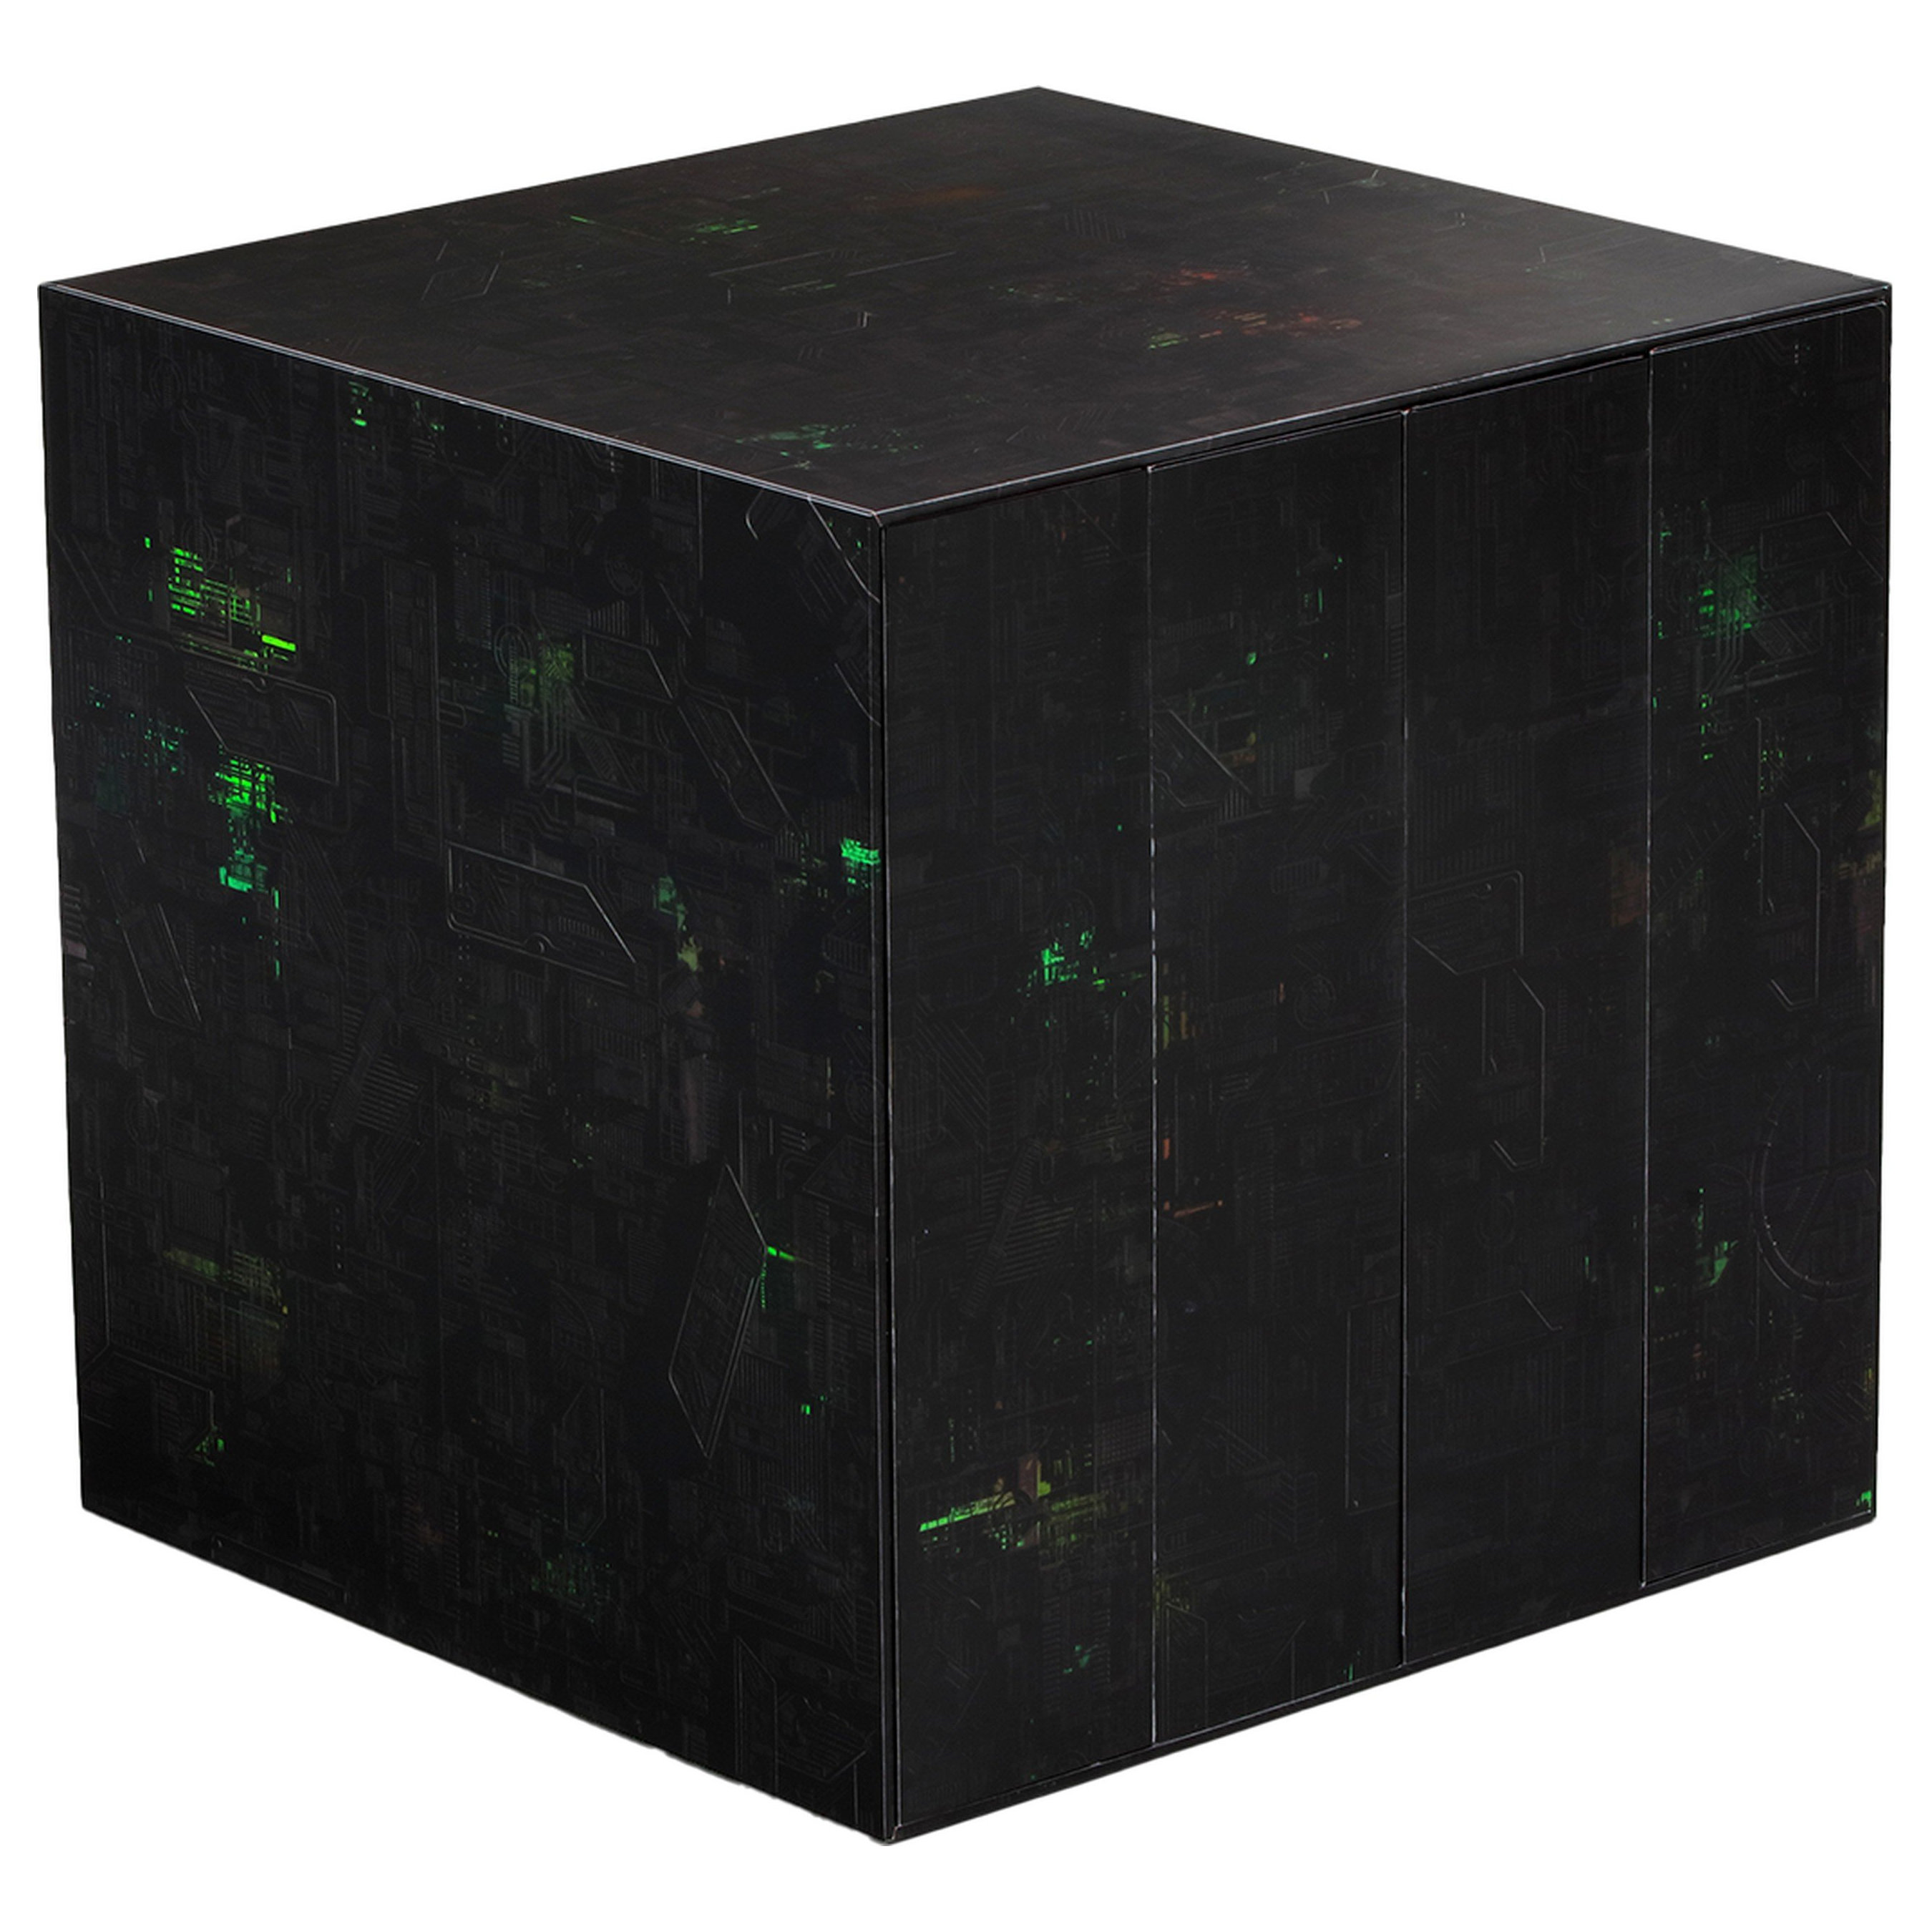 The Trek Collective Cube advent calendar previewed